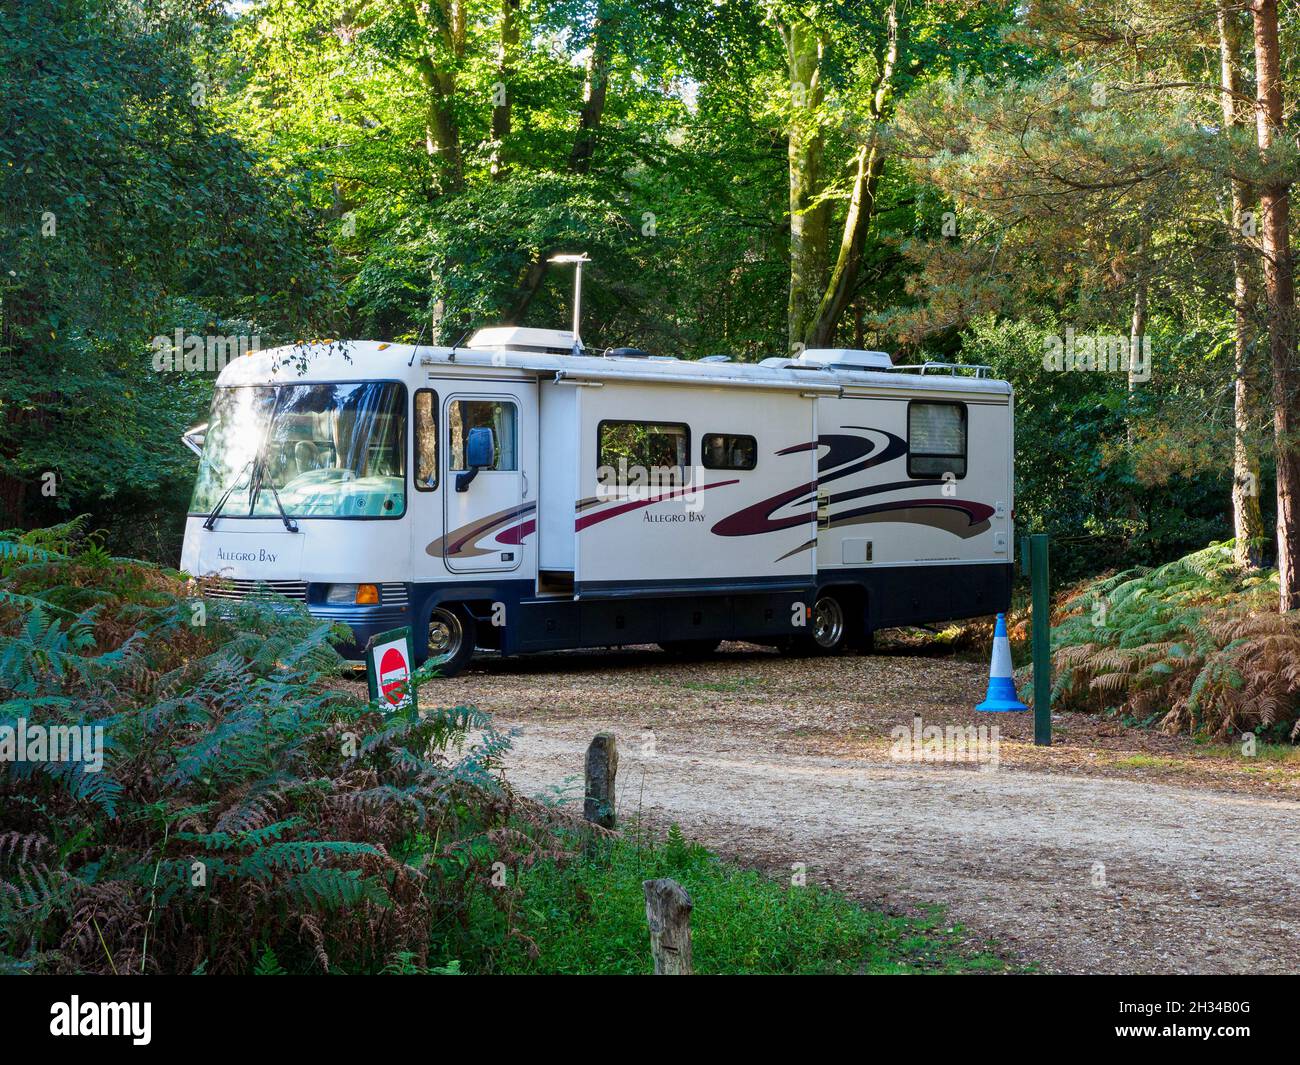 An Allegro Bay American RV at Setthorns campsite, The New Forest, Hampshire, UK Stock Photo